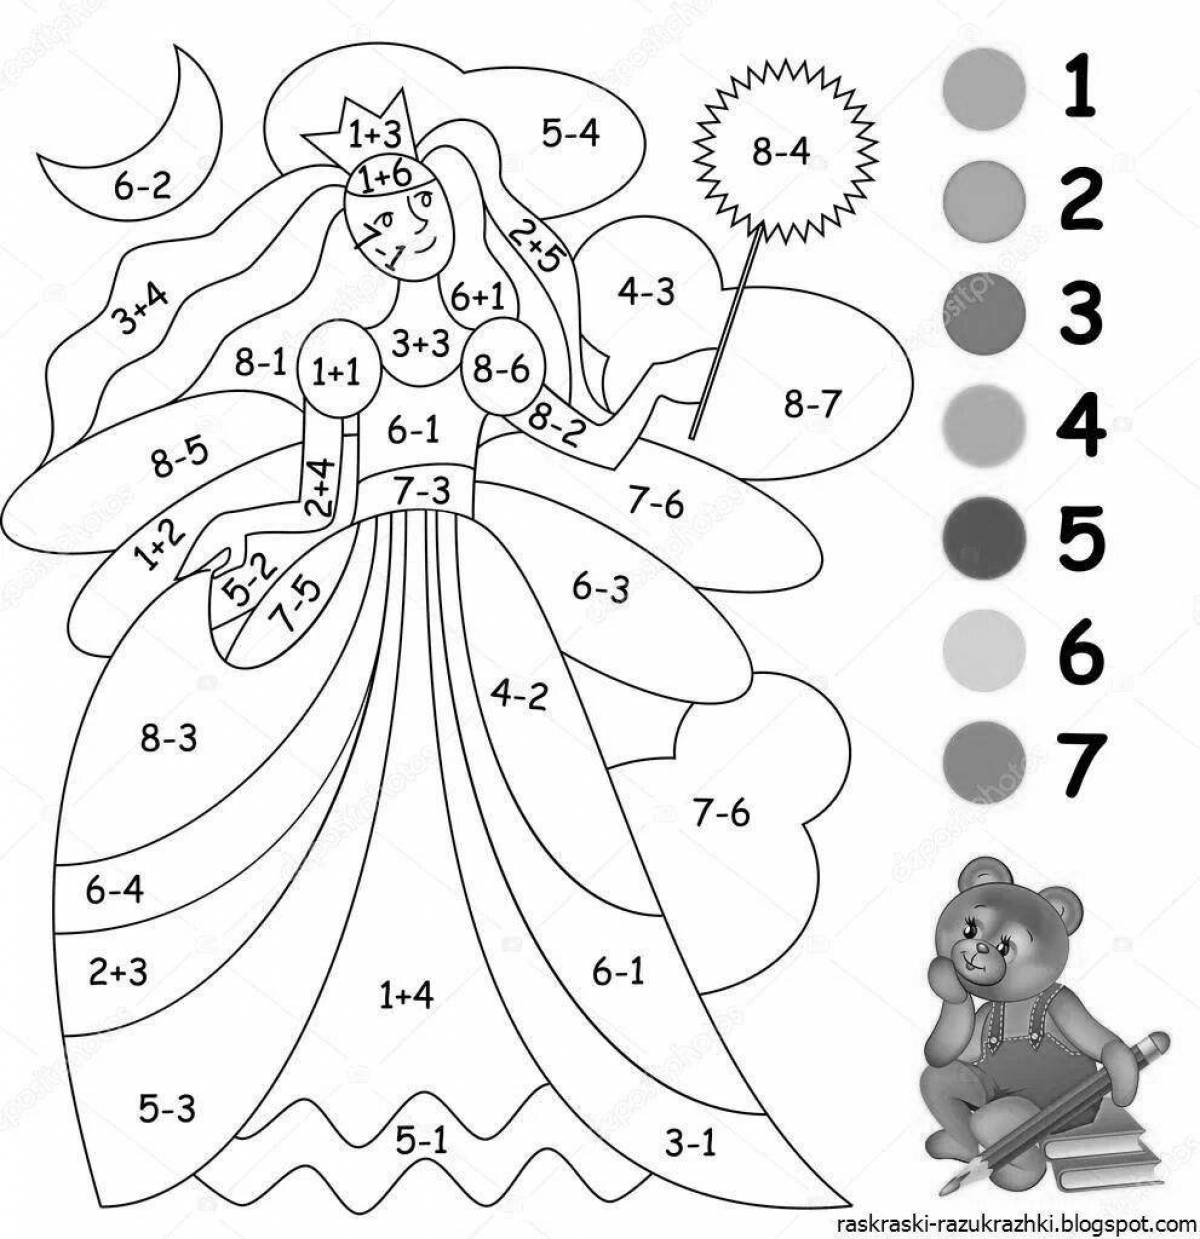 Fun coloring with examples by numbers